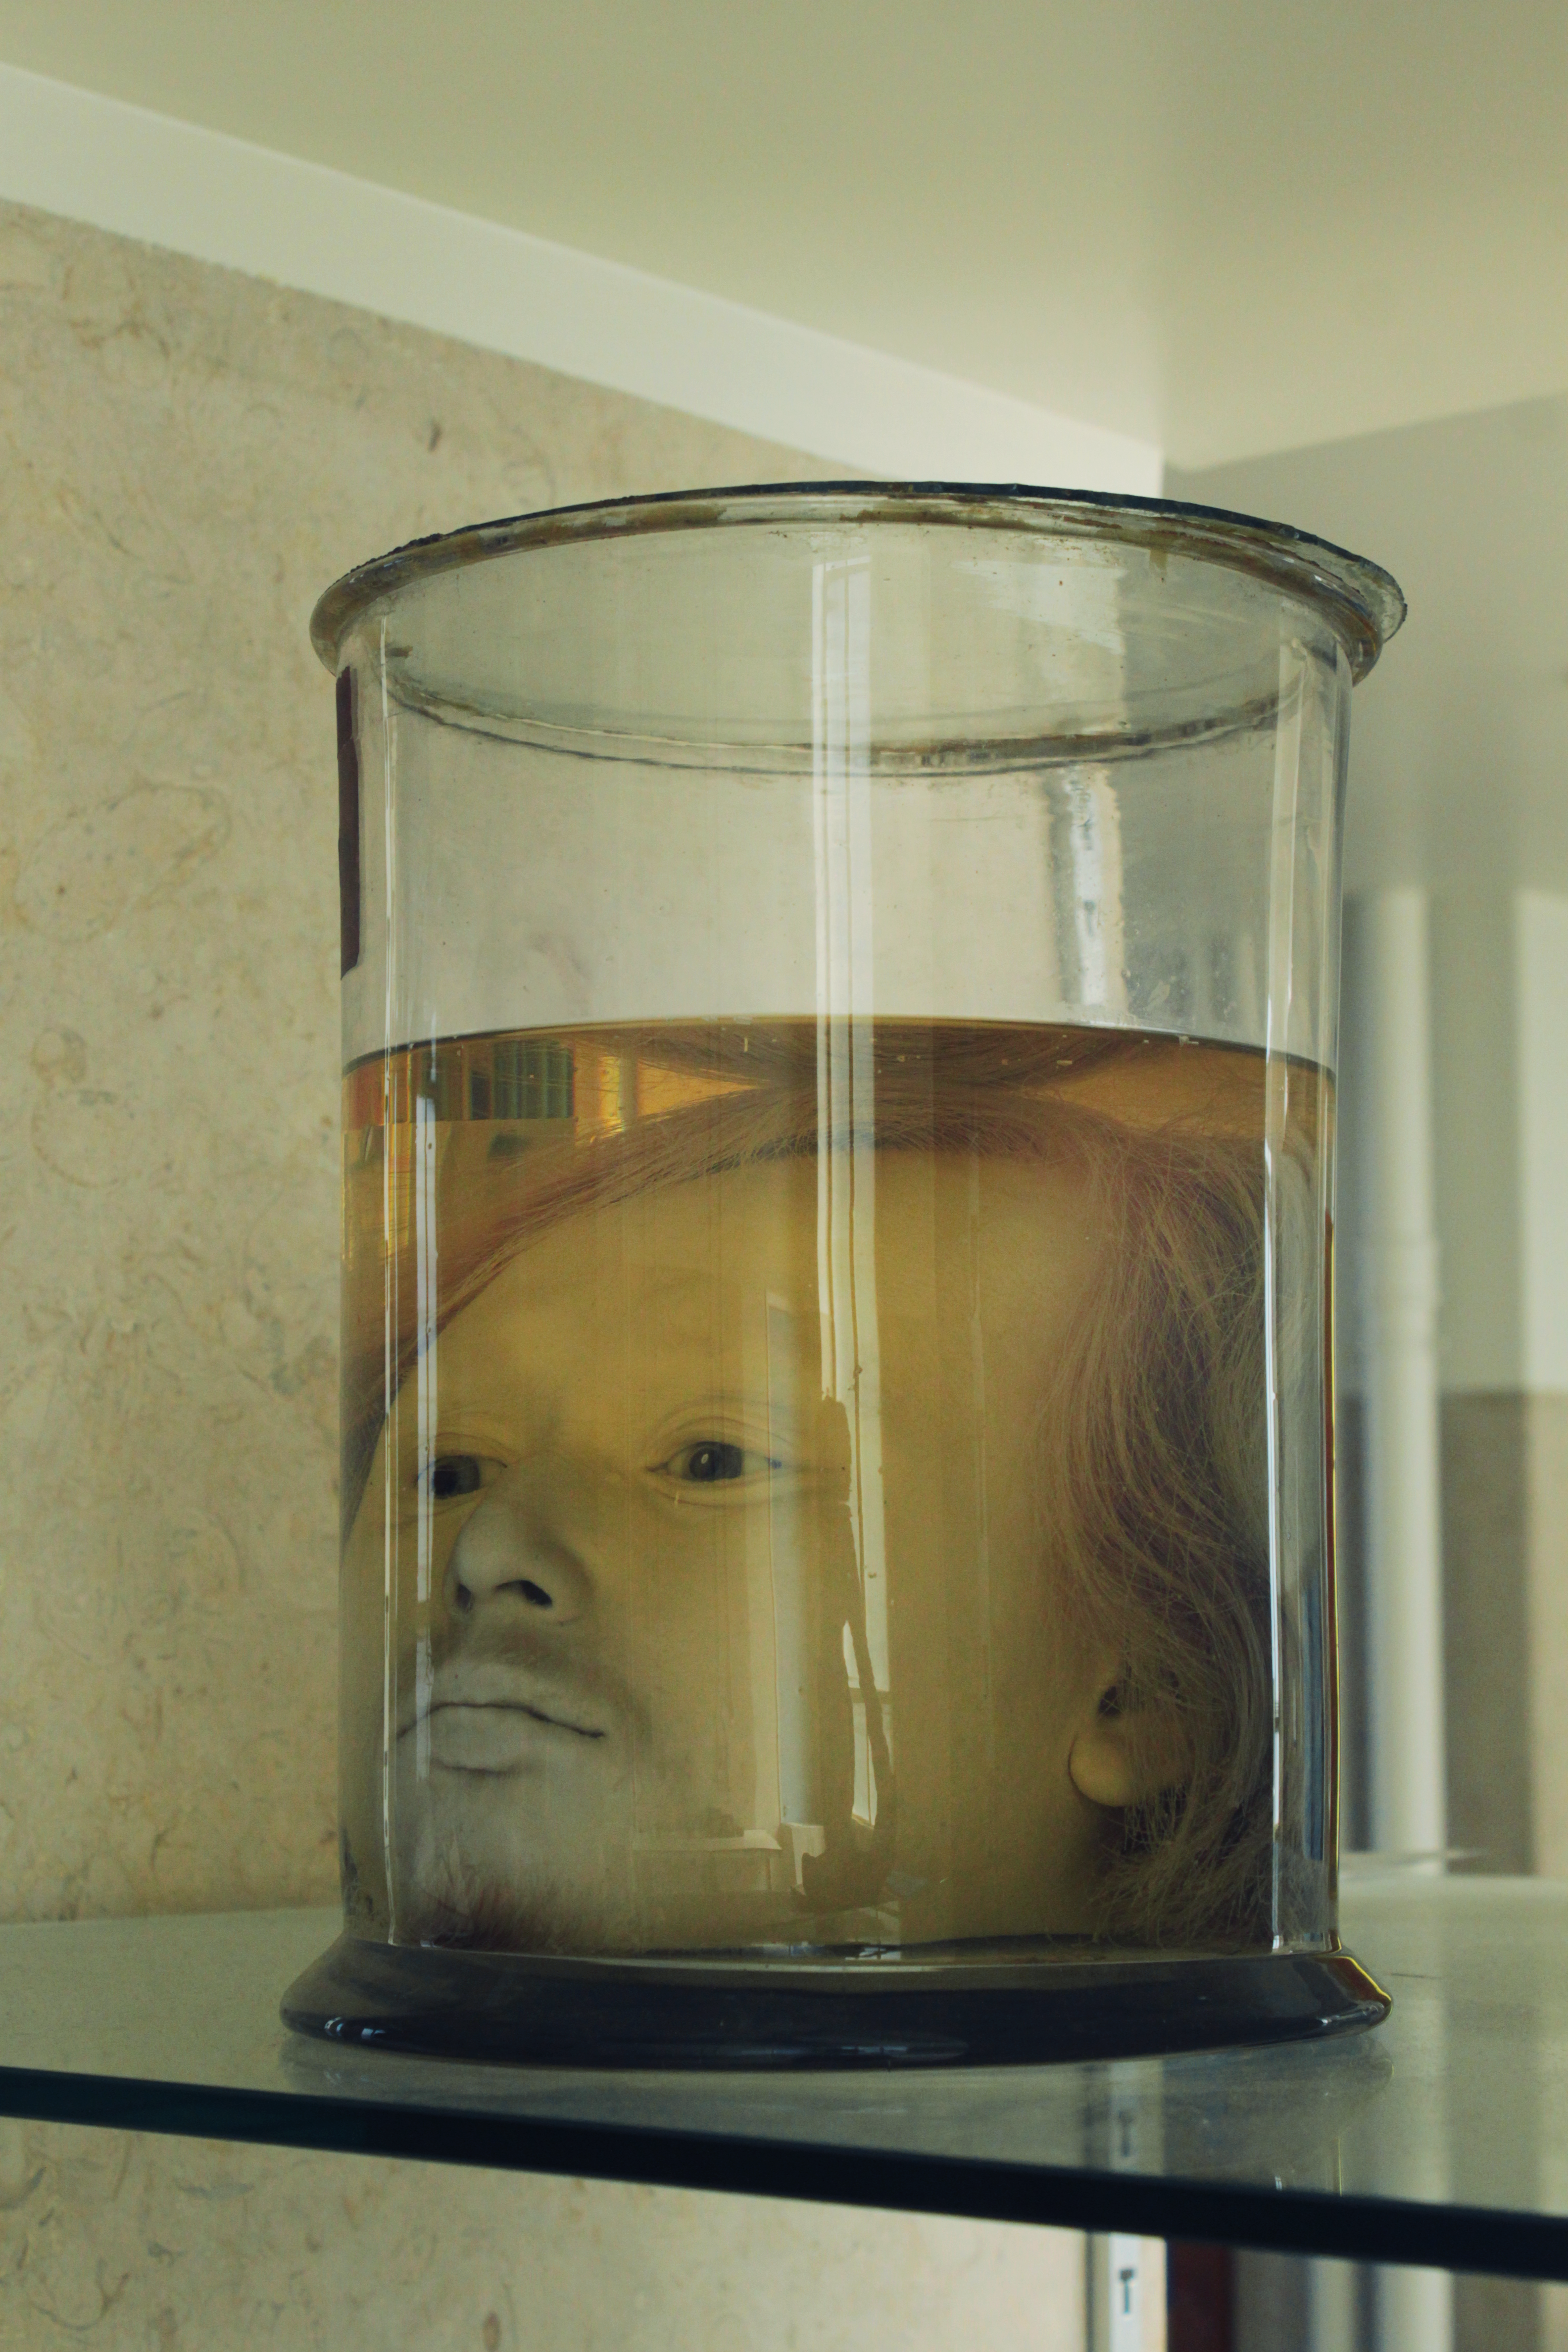 On the trail of Diogo Alves: Diogo Alves' preserved head in the faculty of medicine of the university of Lisbon.